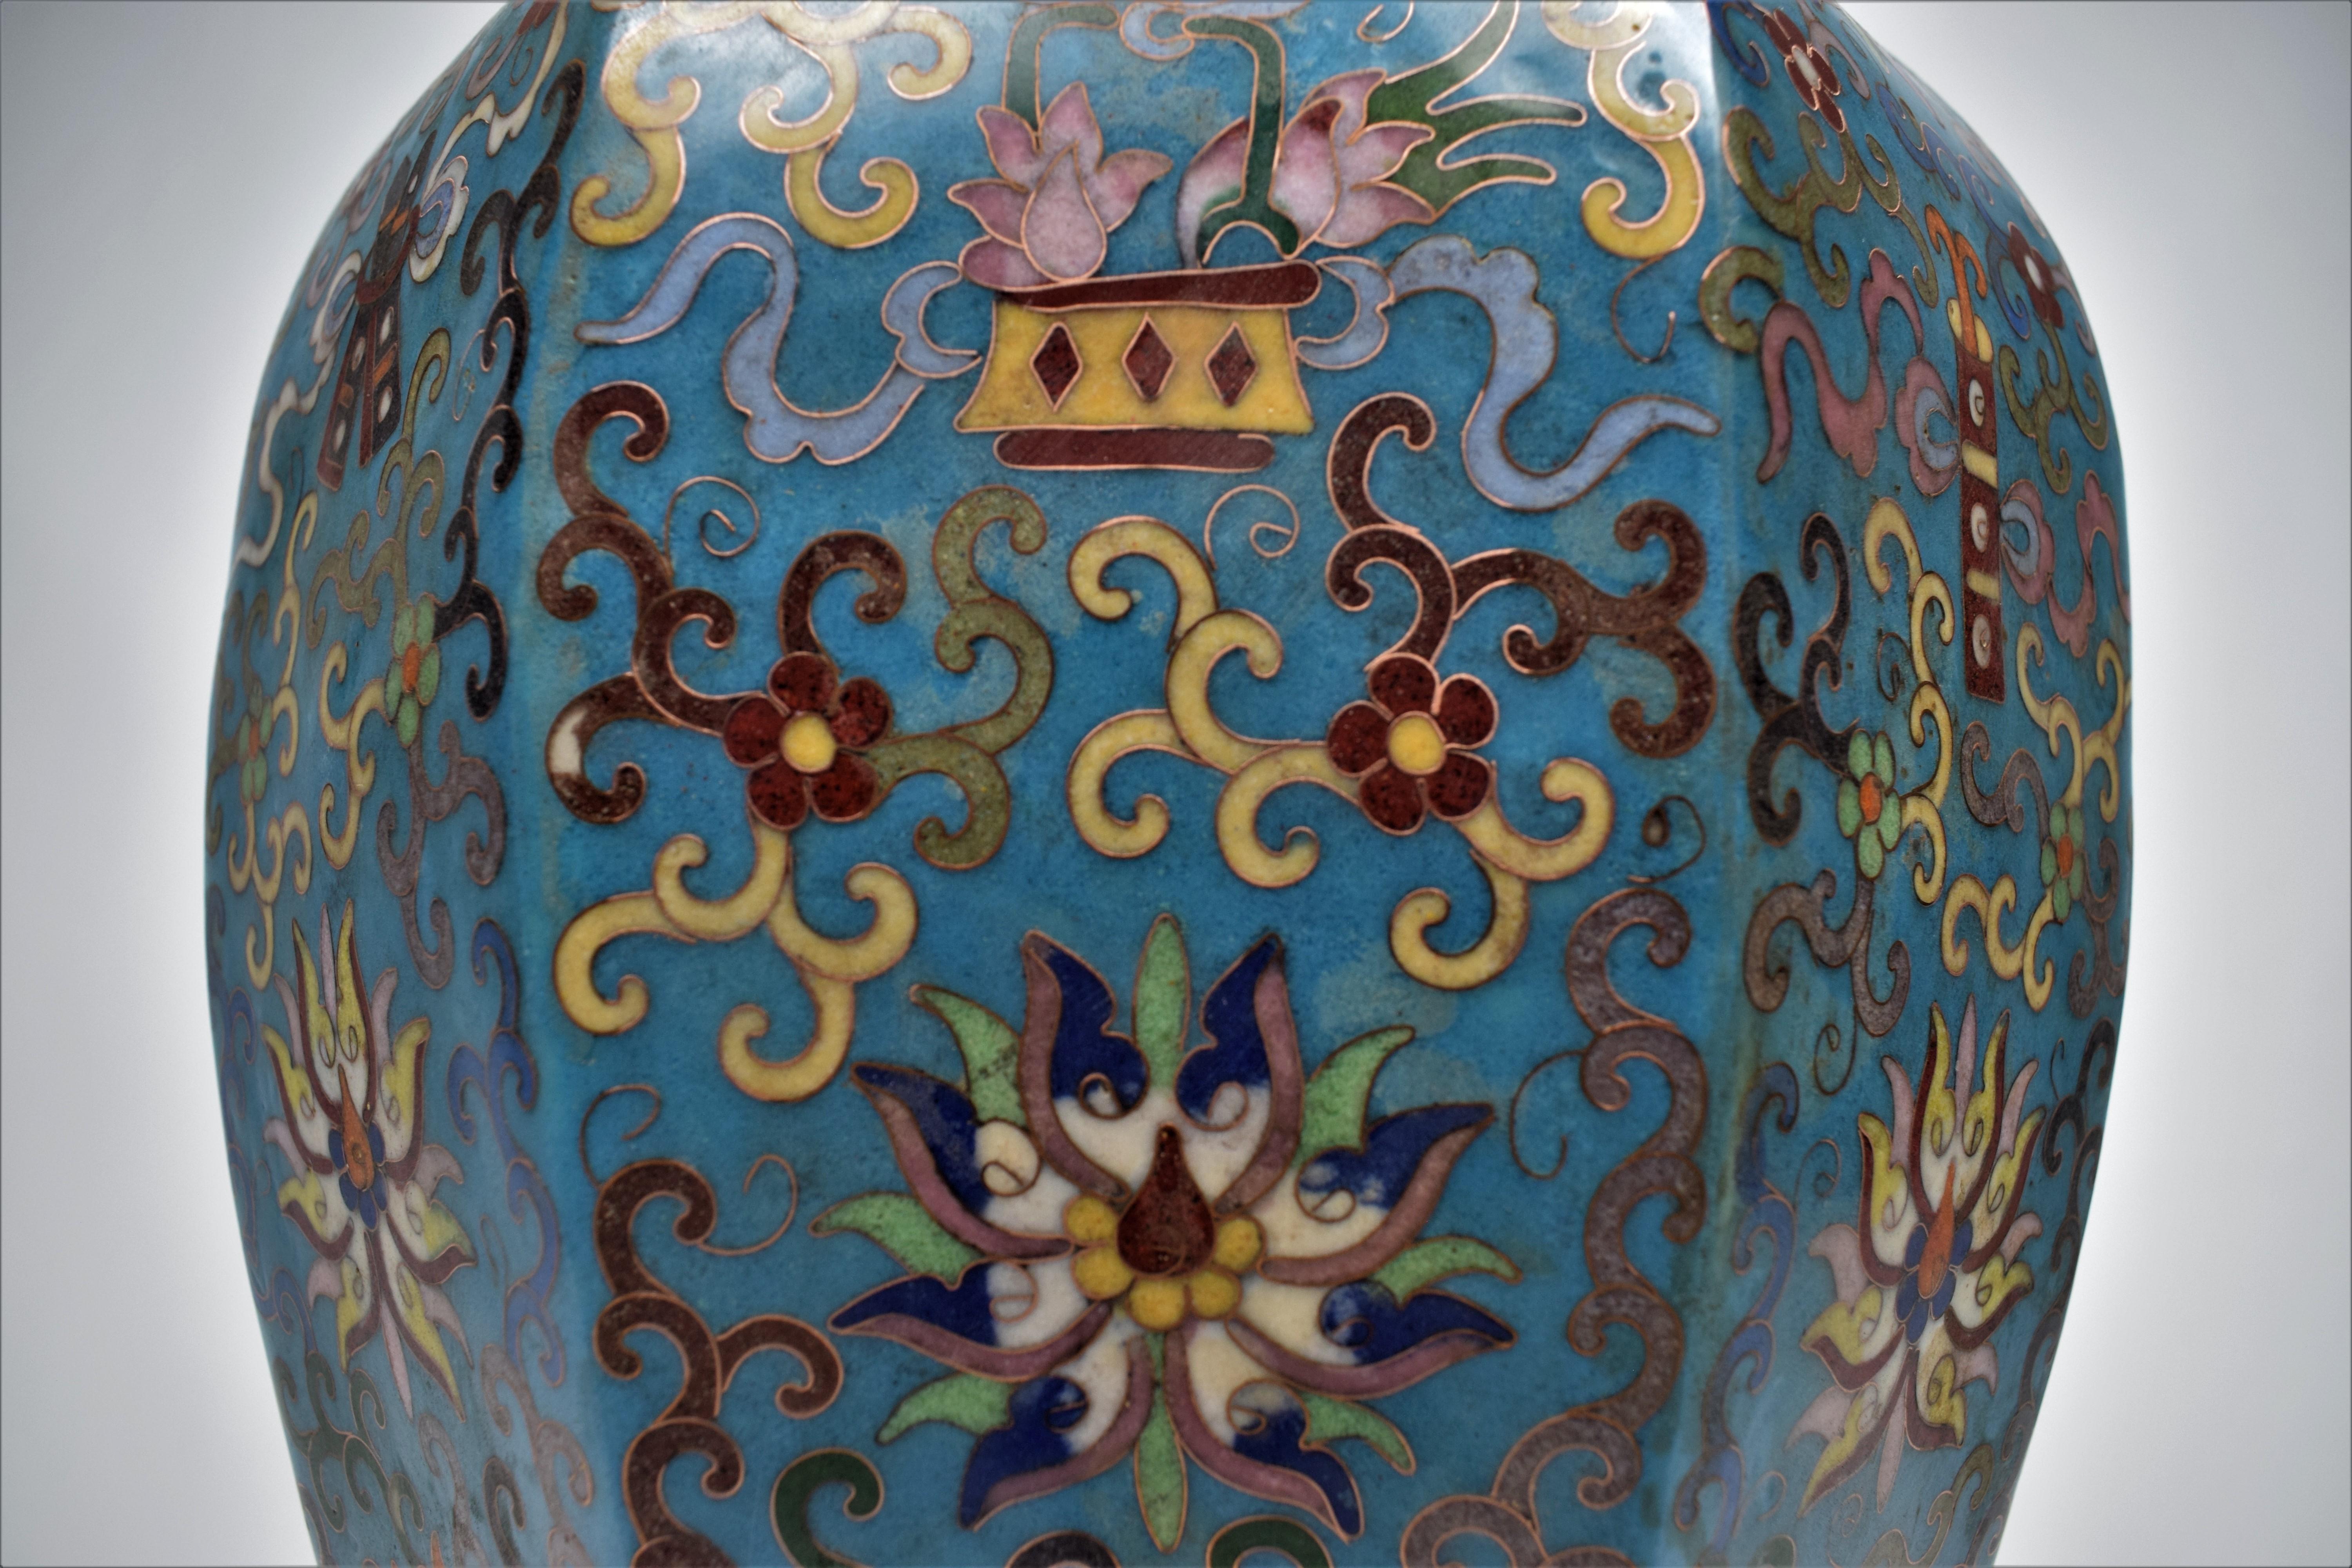 Chinese Large Cloisonné Enamel Bottle Vases Late Qing Dynasty, 19th Century For Sale 4